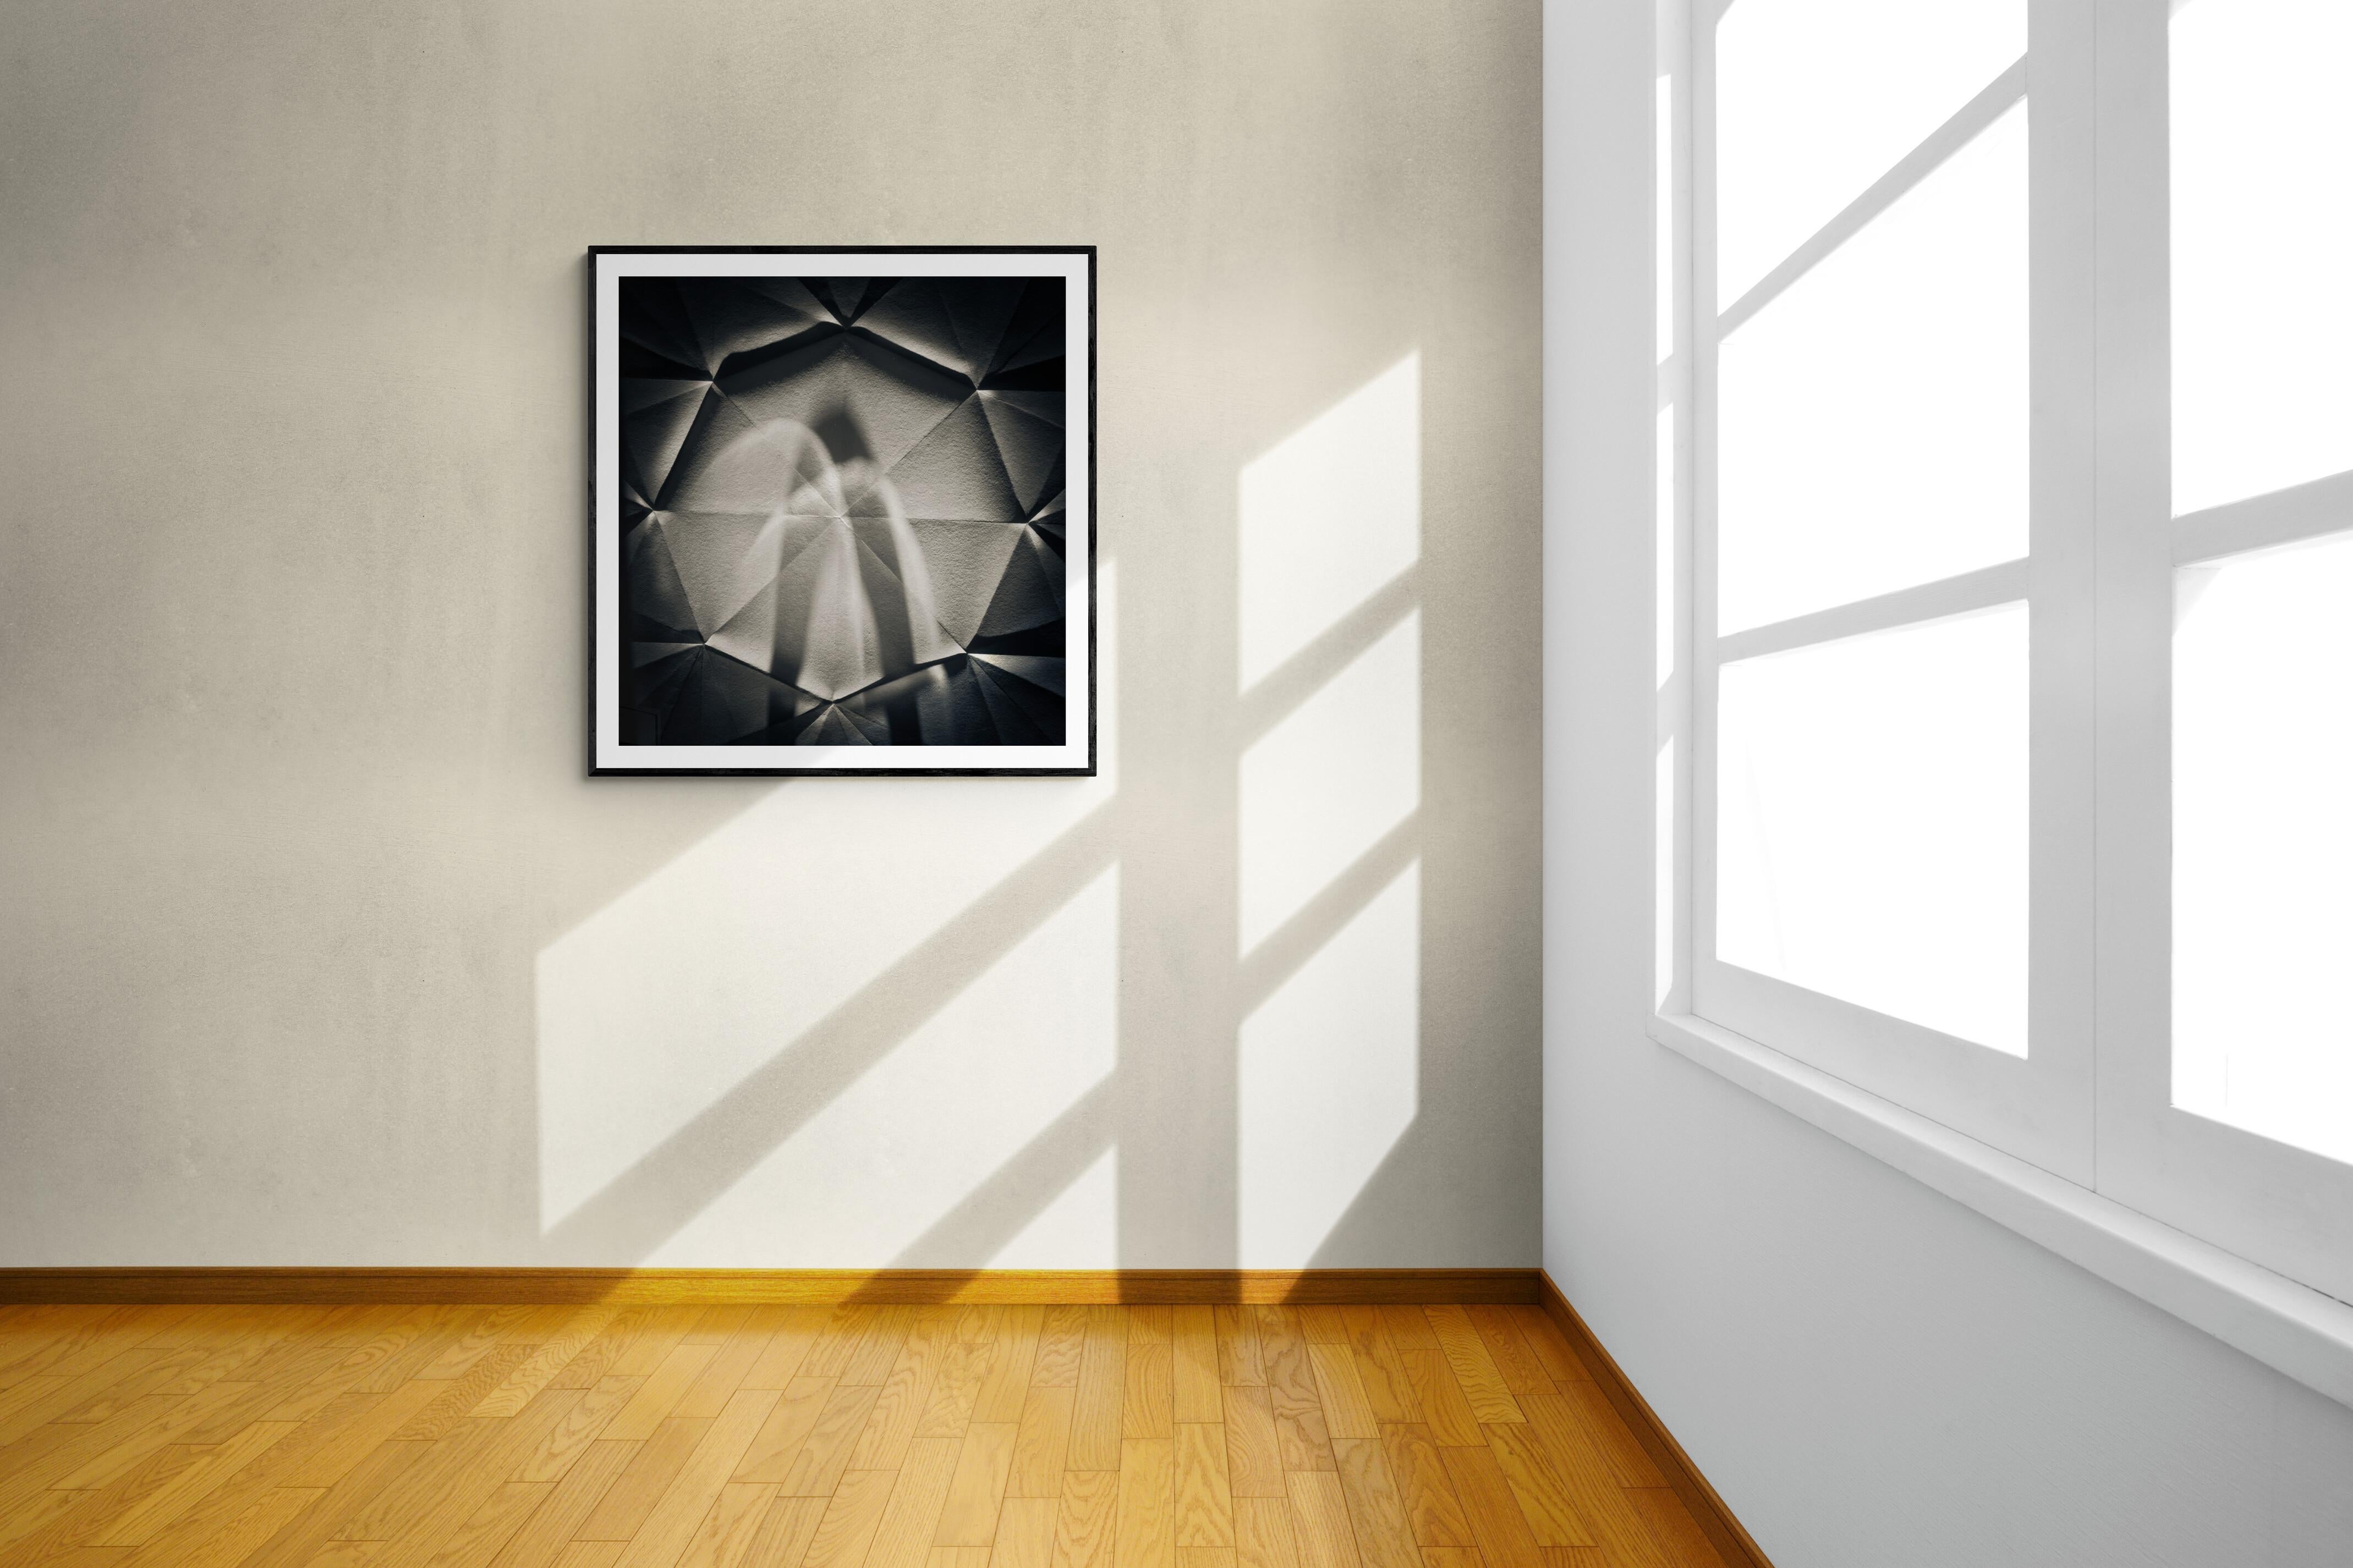  Limited Edition 1 / 10 Black and White Photograph - Origami Abstract #73 For Sale 1